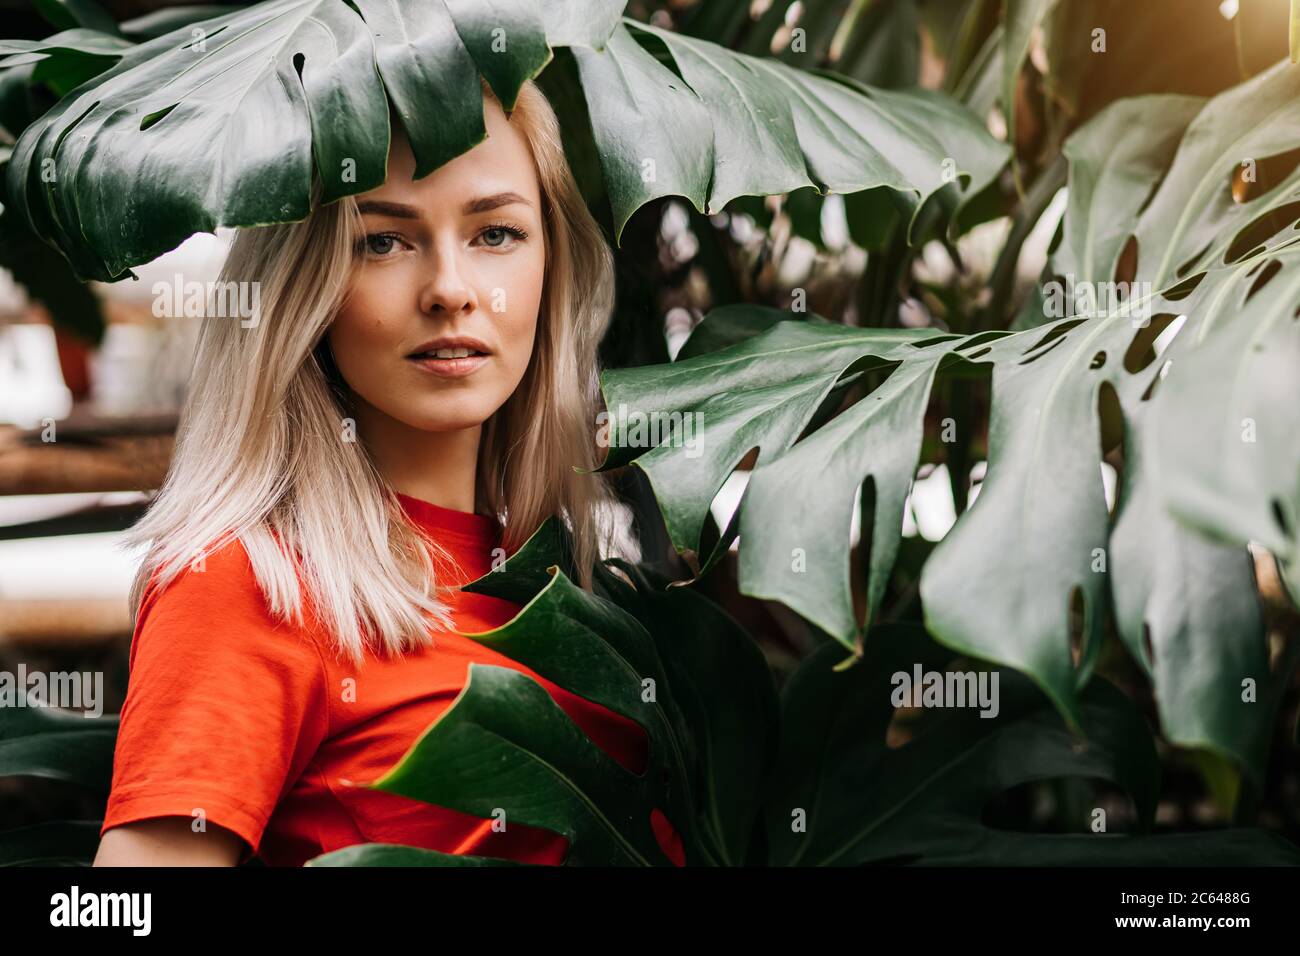 Blonde lady with natural makeup posing in rainforest. Gorgeous caucasian woman in red t shirt standing among monstera leaves, enjoying summer vacation Stock Photo